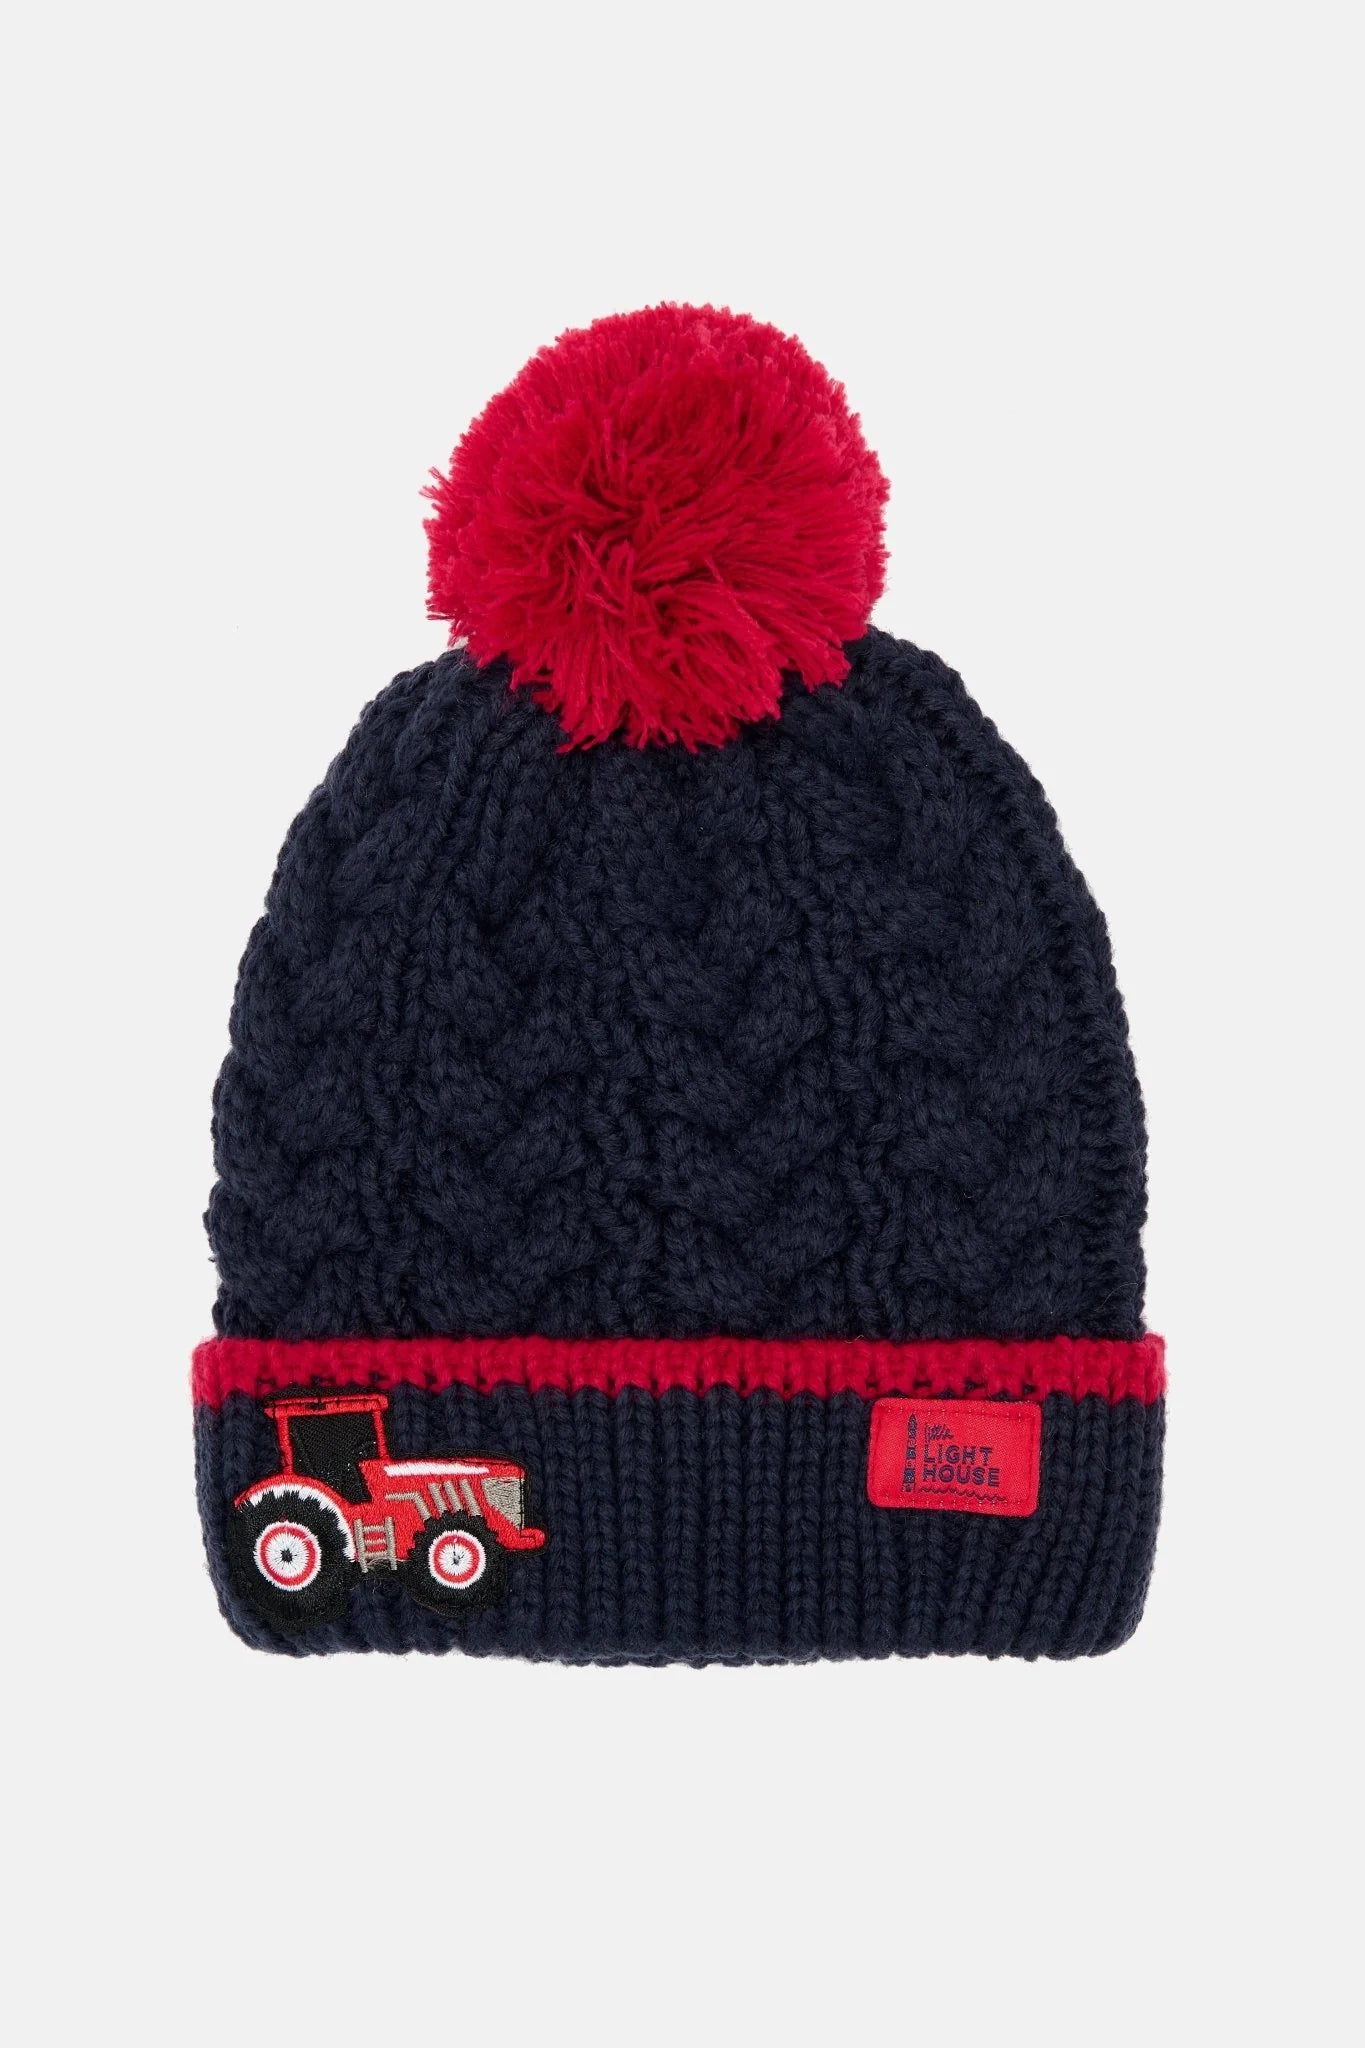 Bobbie Bobble Hat | Red Tractor